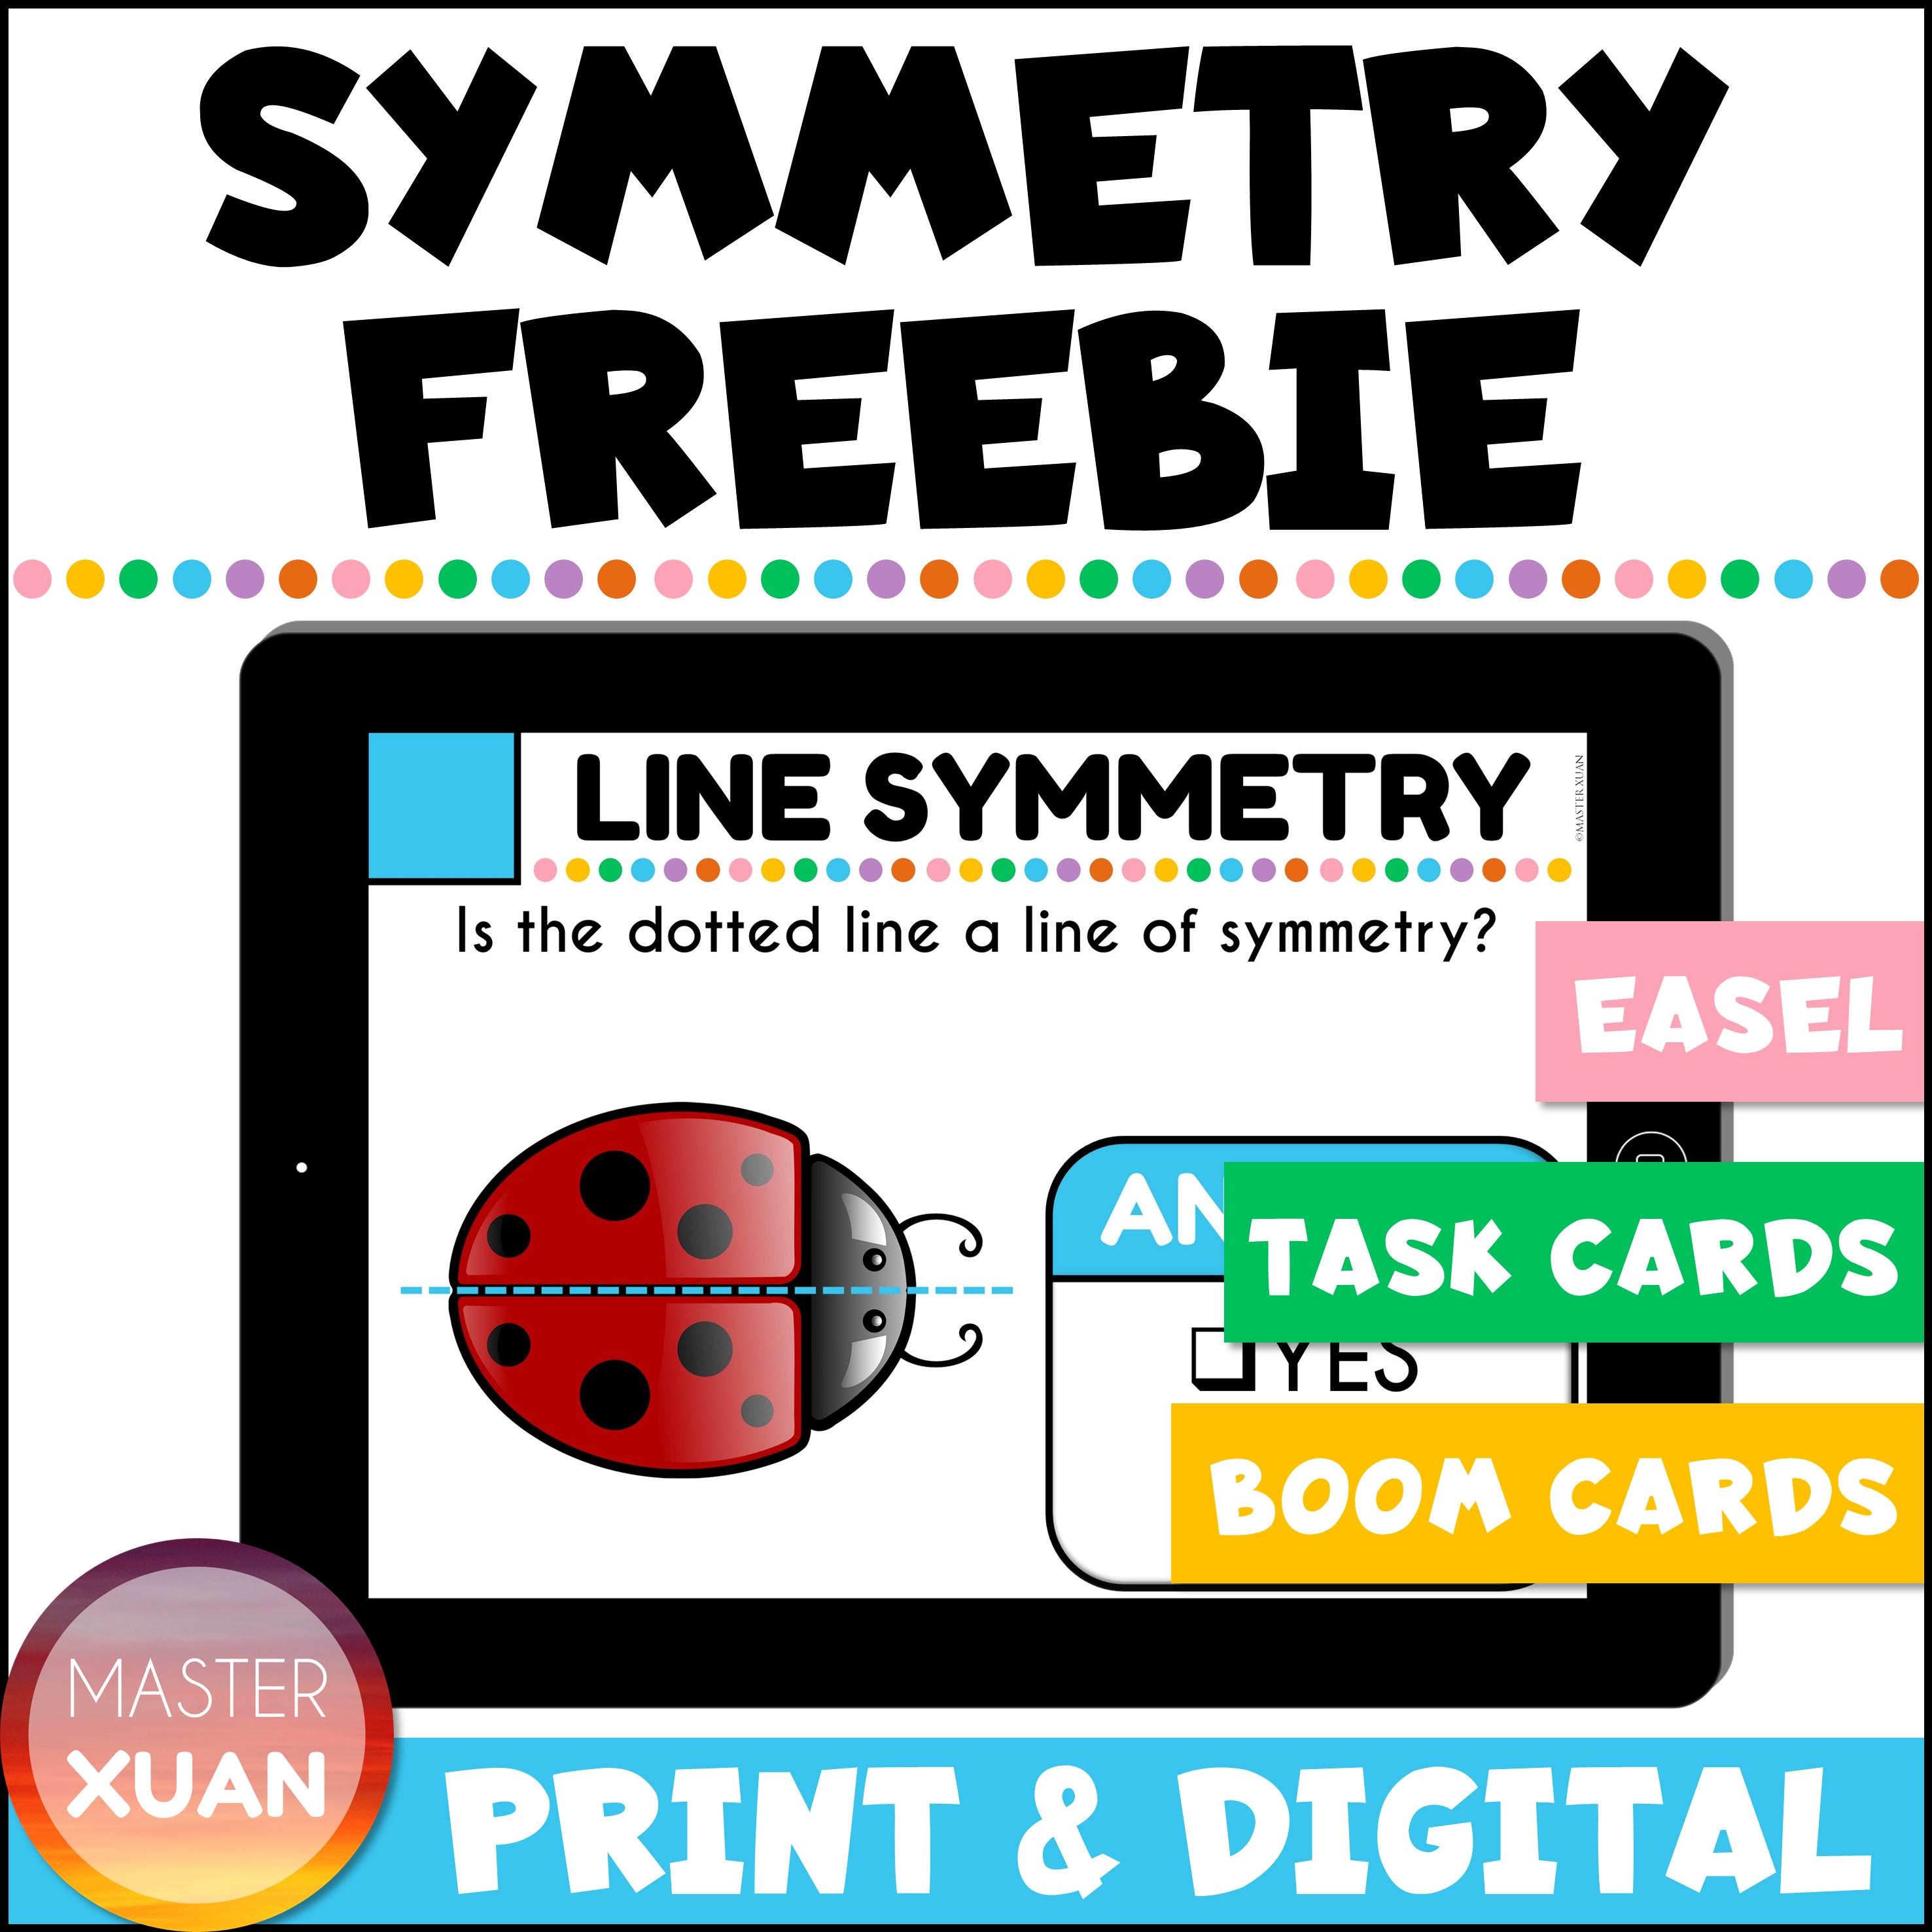 Try out this math symmetry for free!